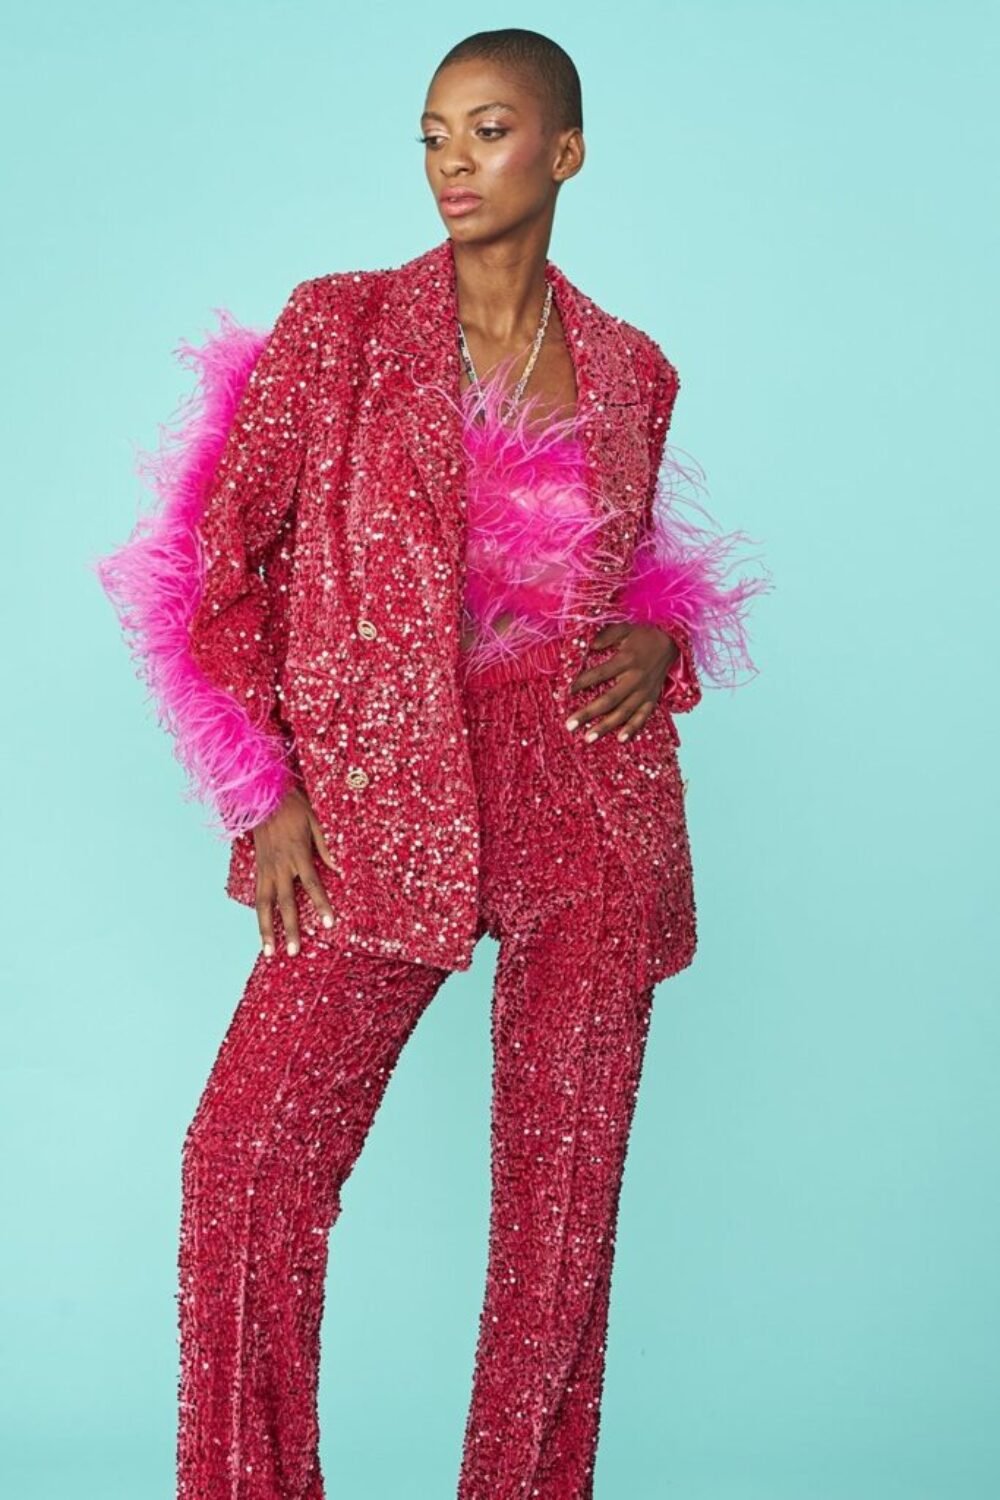 Shop Lux Pink Sequin Feather Trim Blazer and women's luxury and designer clothes at www.lux-apparel.co.uk